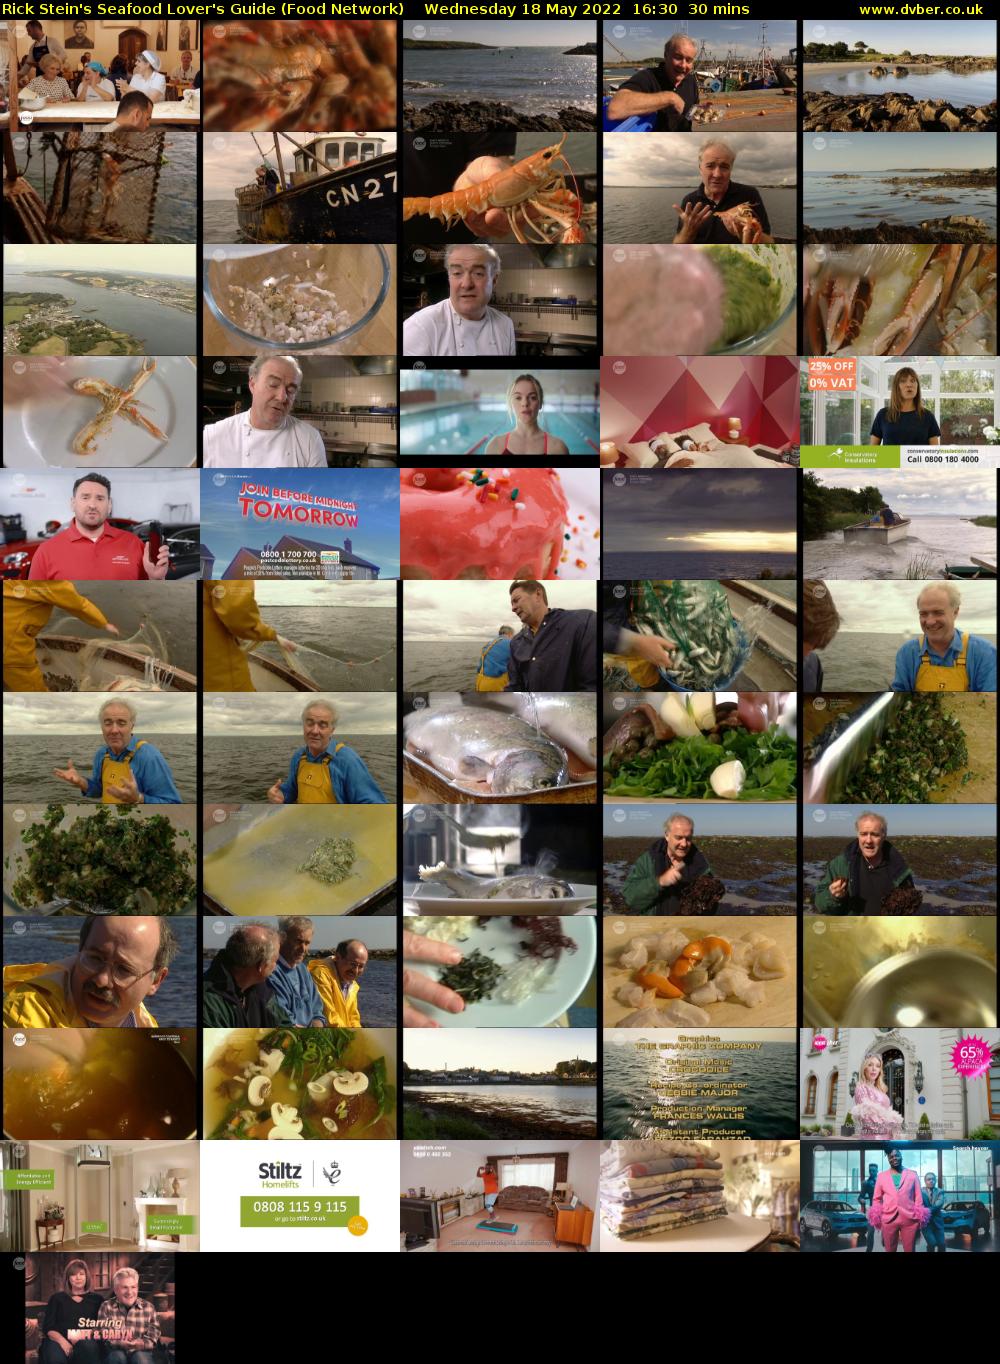 Rick Stein's Seafood Lover's Guide (Food Network) Wednesday 18 May 2022 16:30 - 17:00